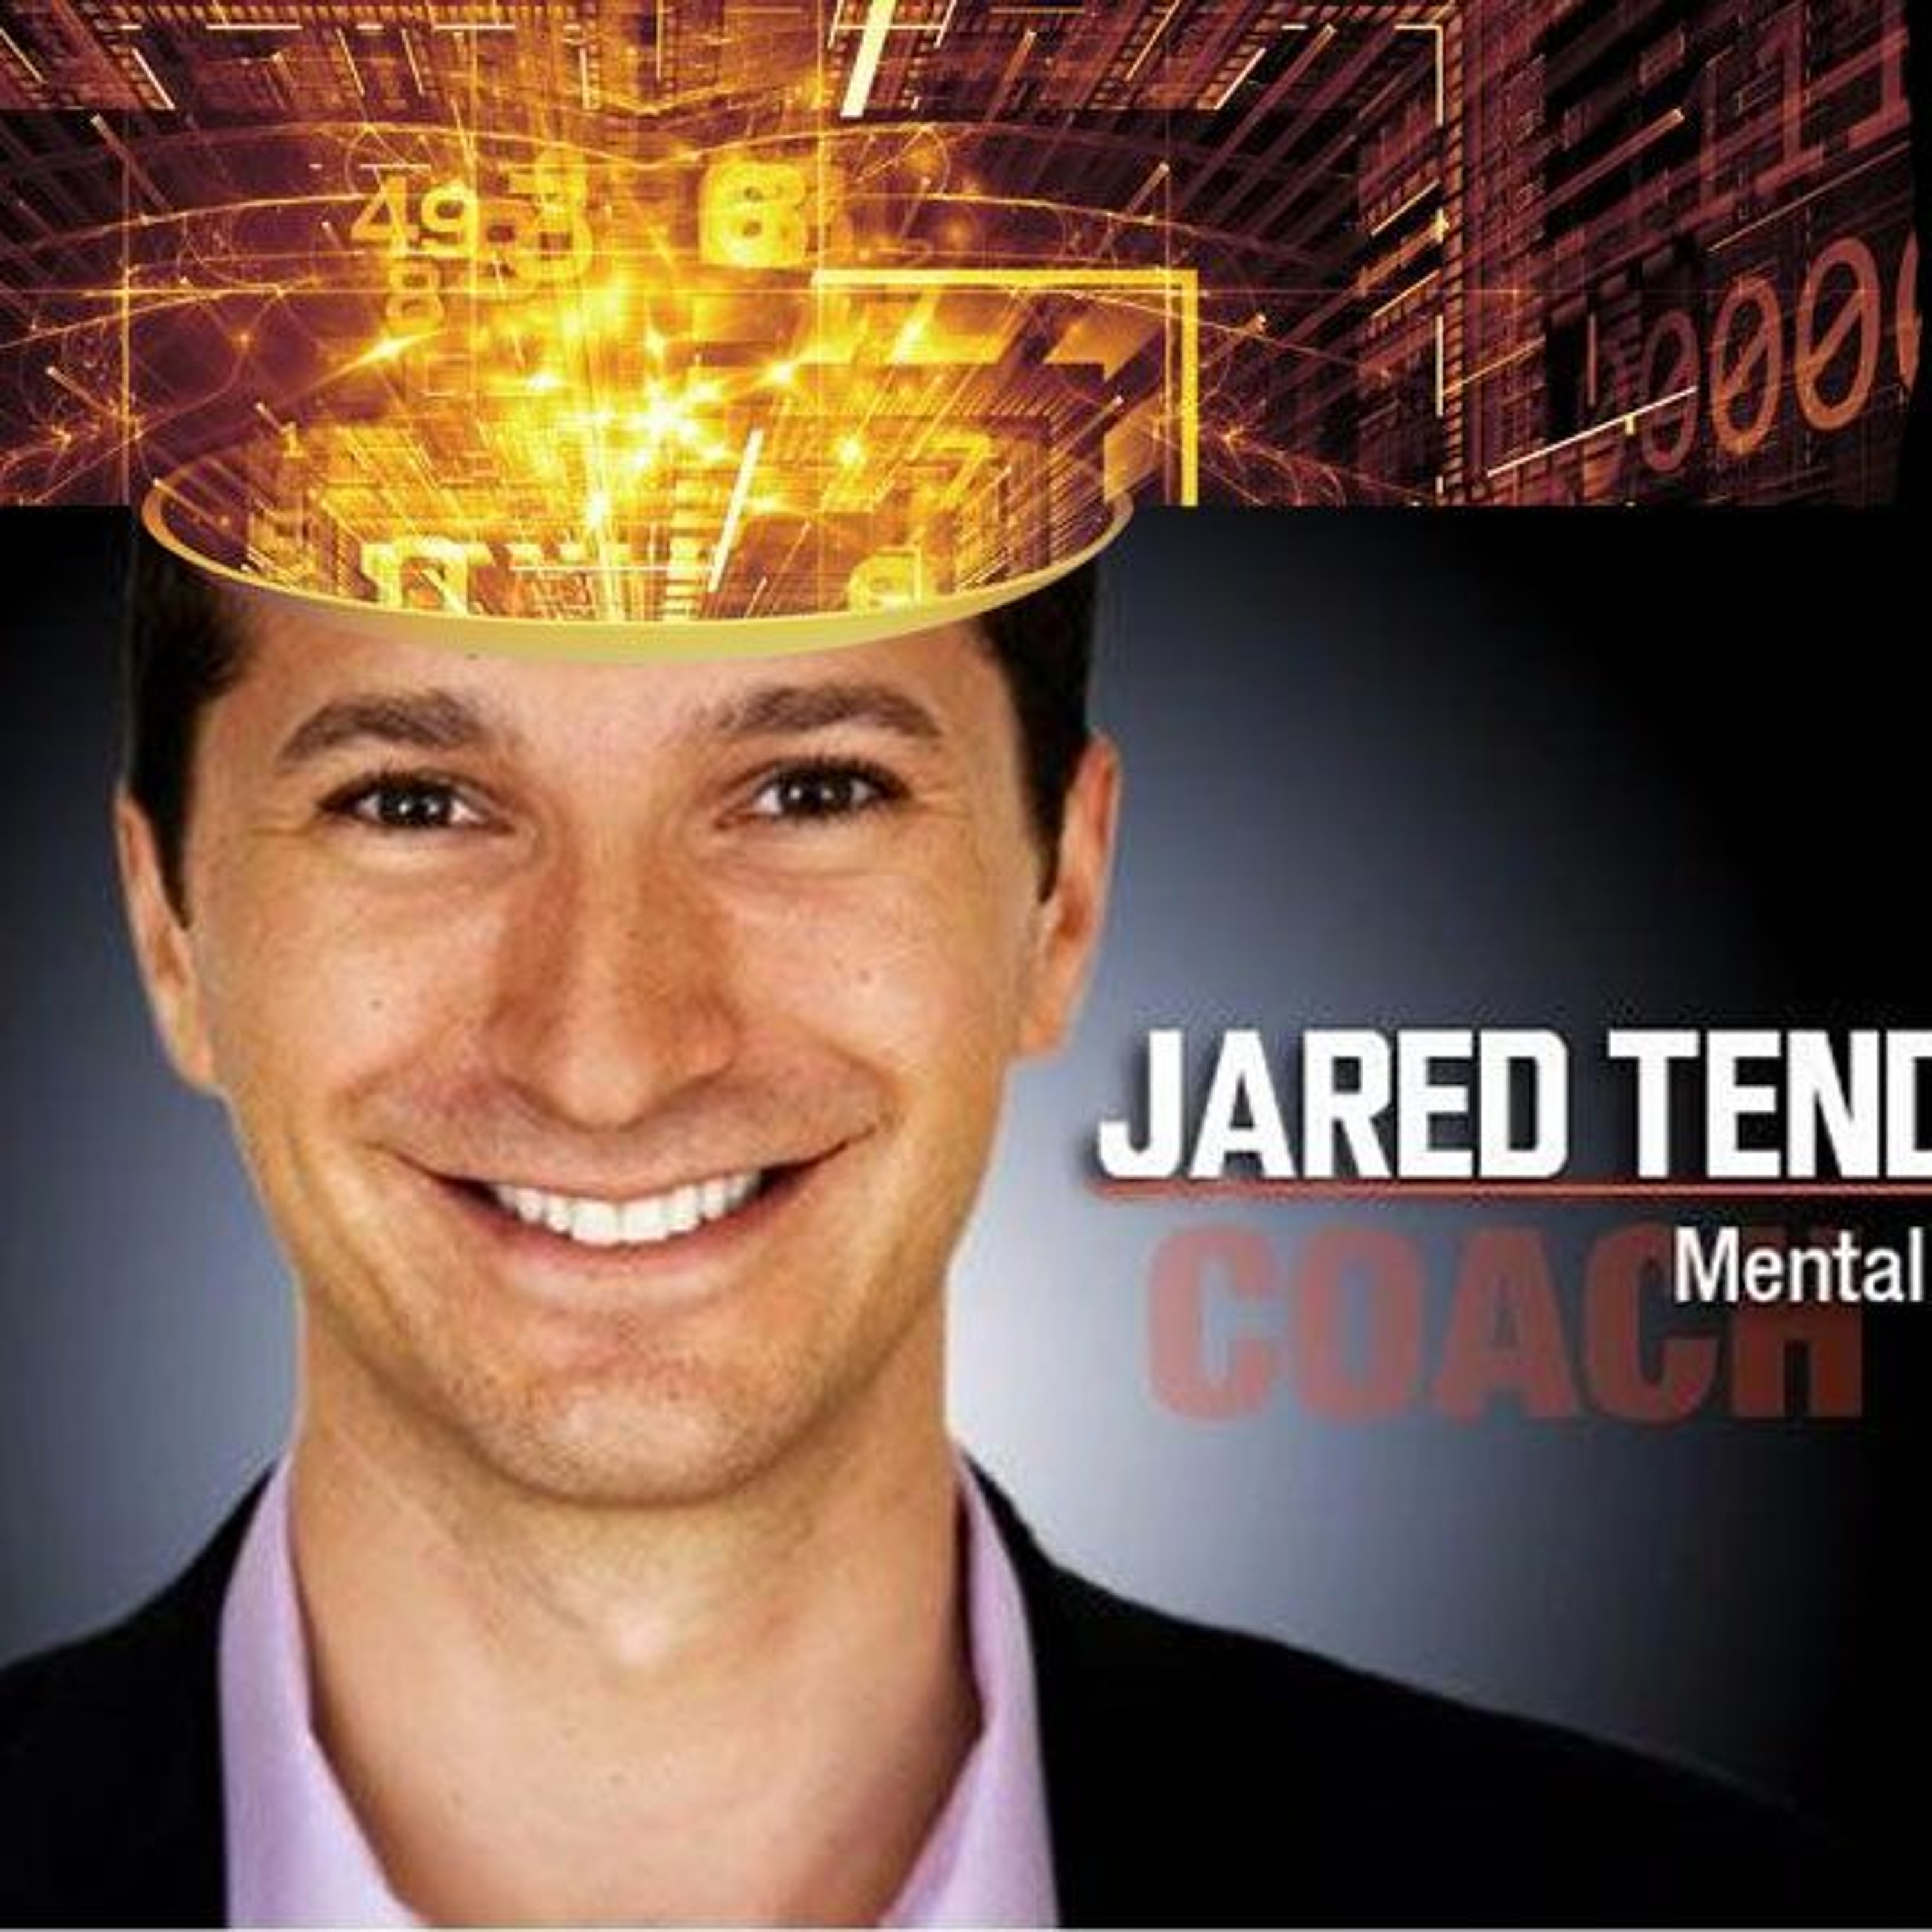 Going Mental with Jared Tendler